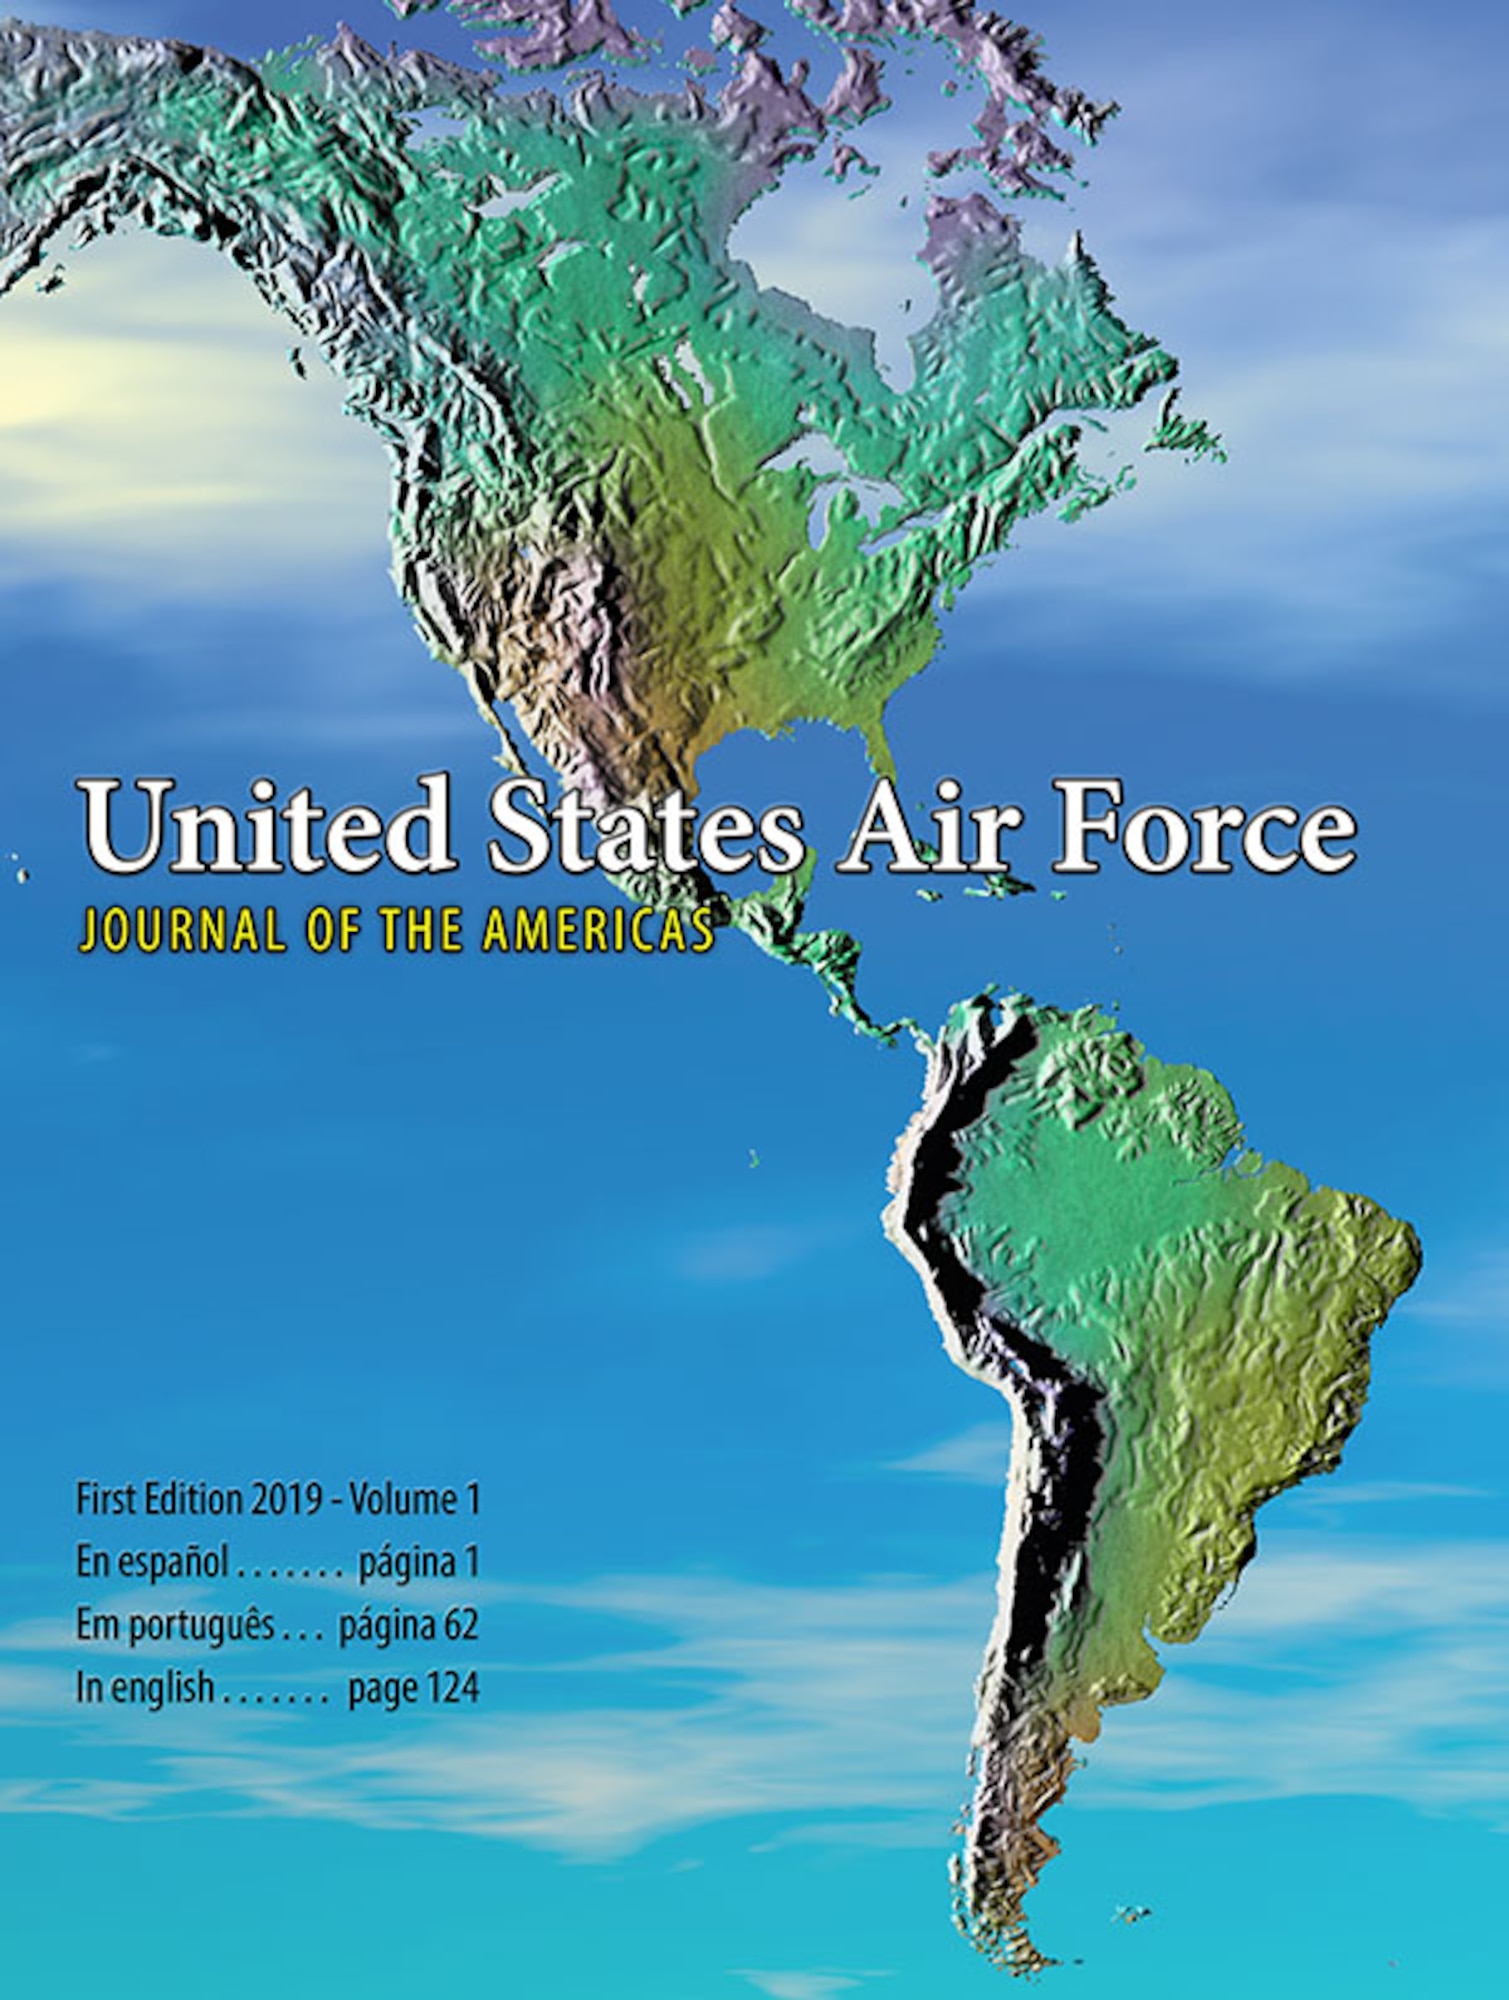 United States Air Force Journal of the Americas